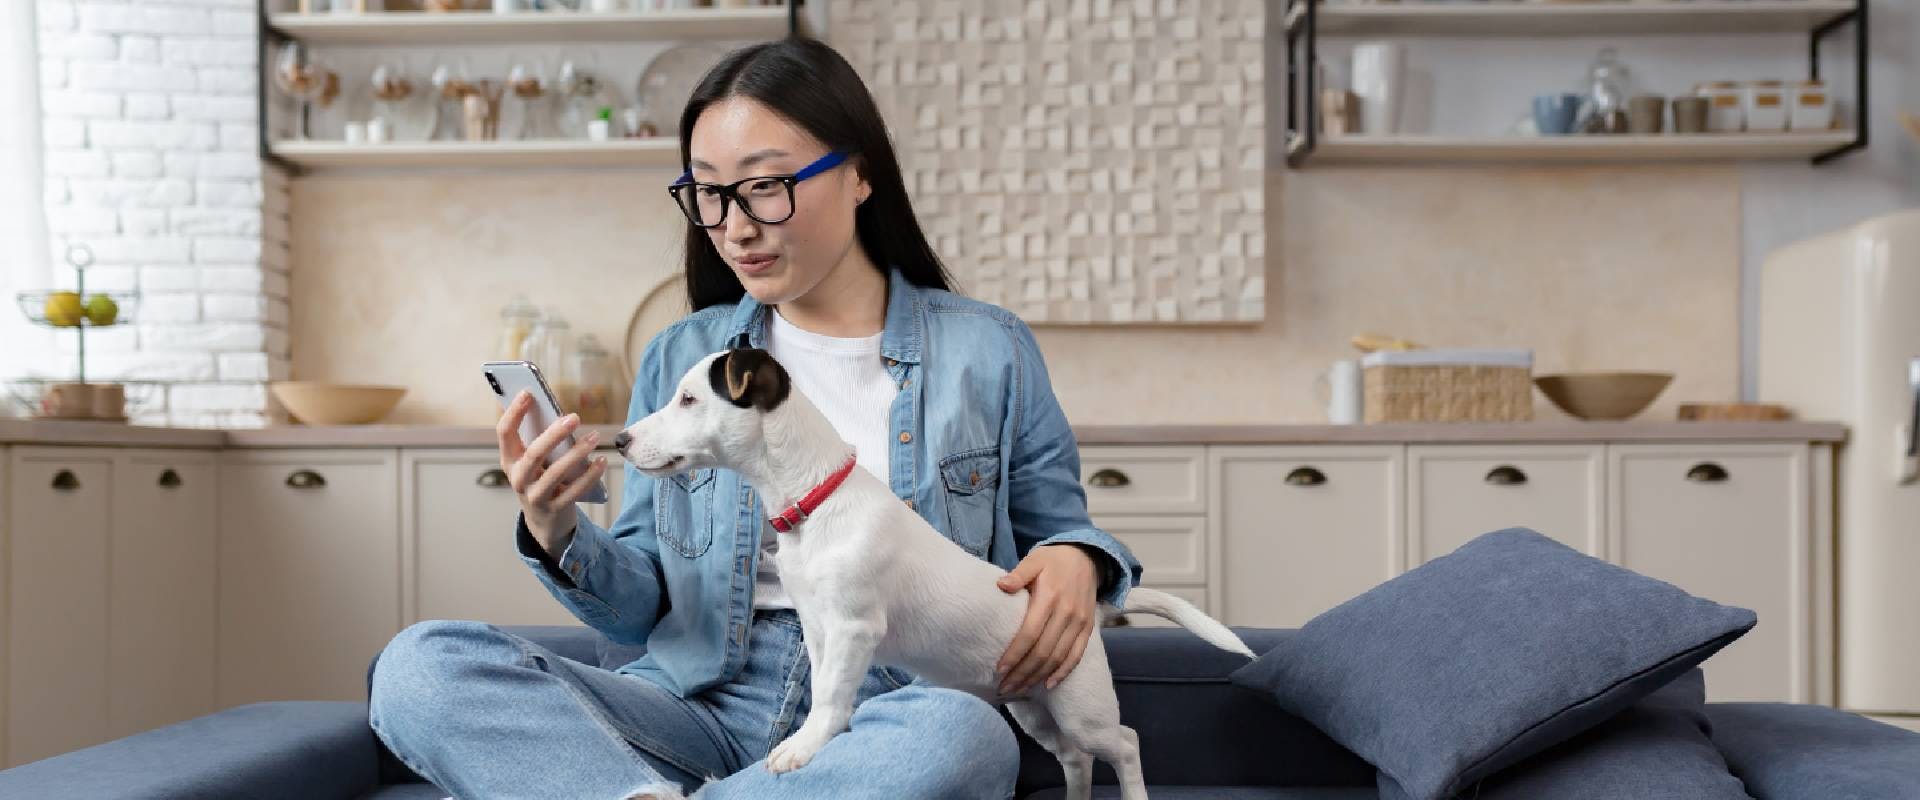 Woman sitting on sofa at home and using phone with a dog